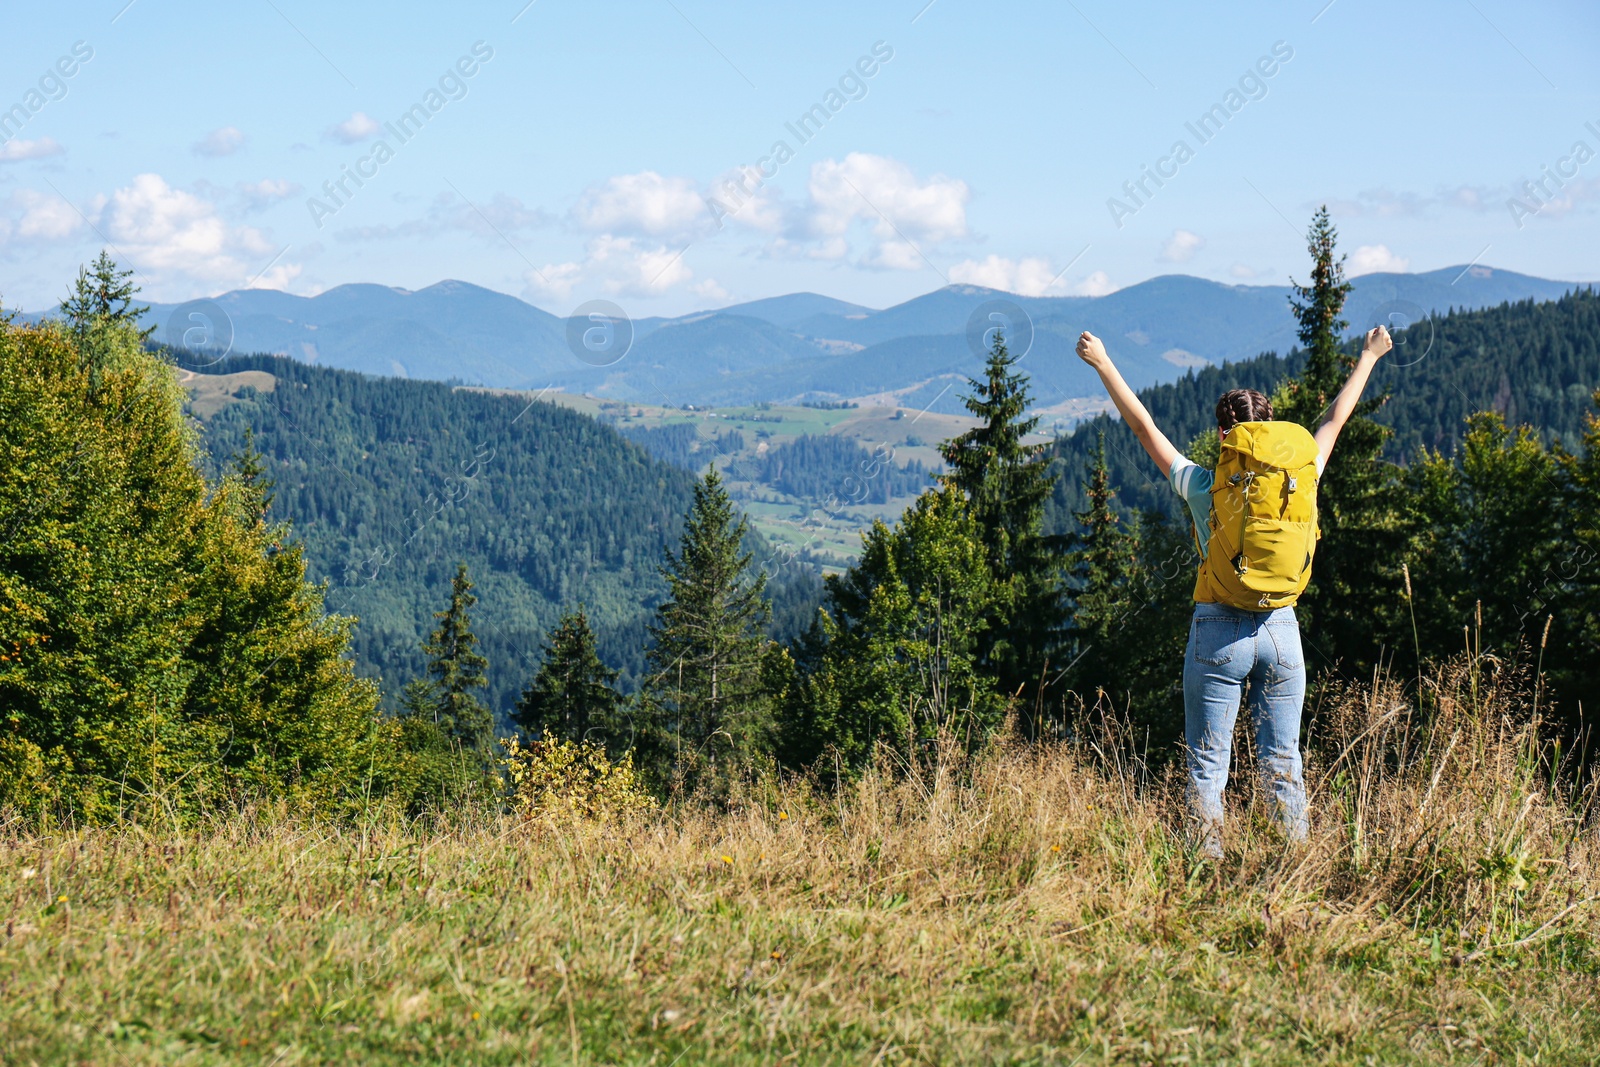 Photo of Tourist with backpack in mountains on sunny day, back view